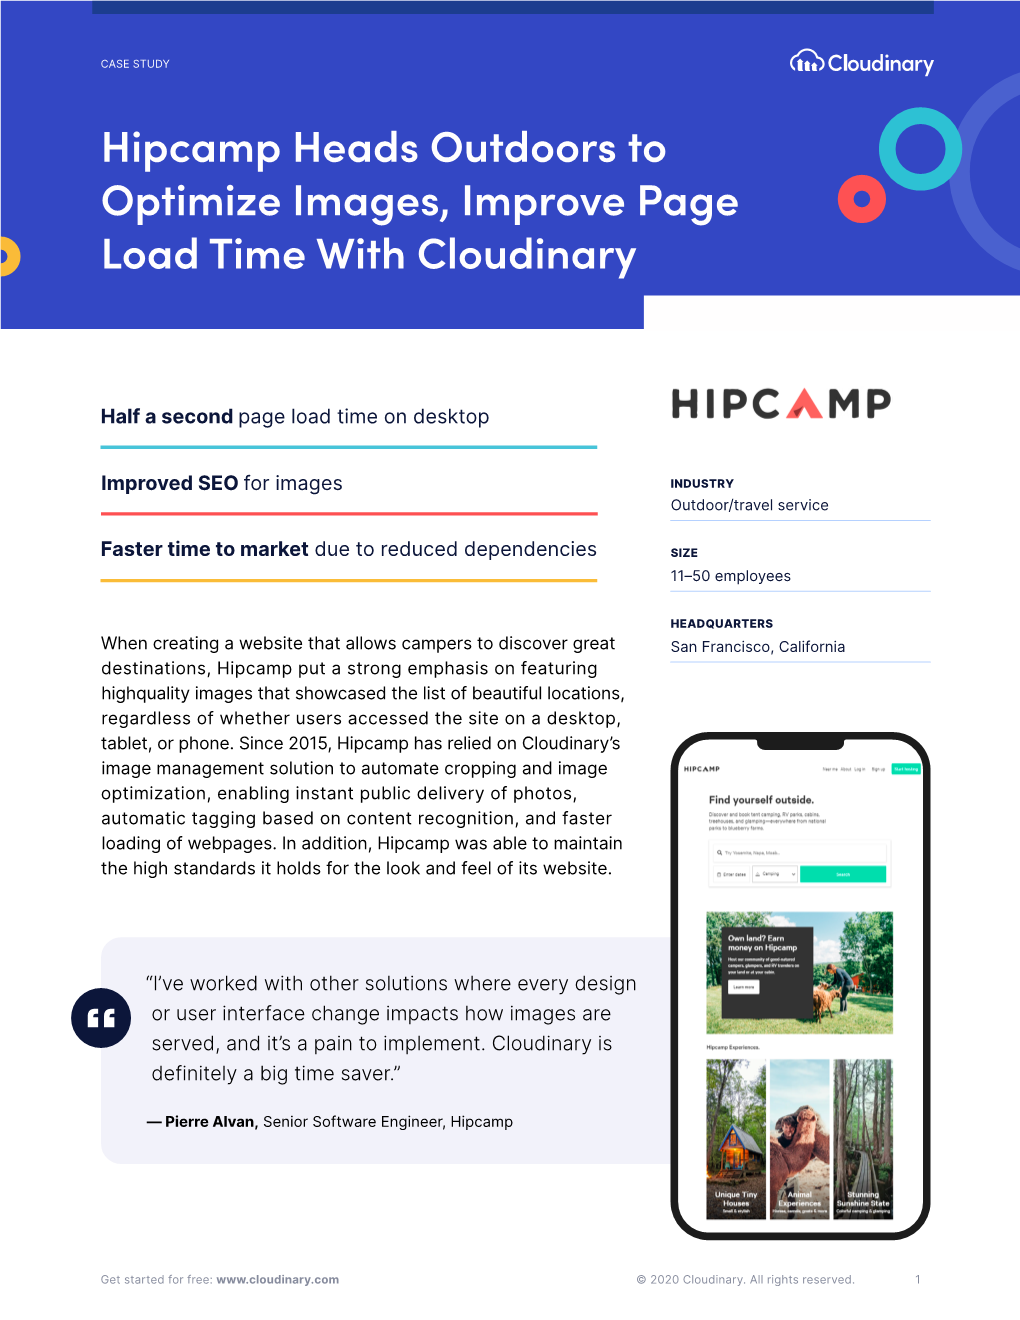 Hipcamp Heads Outdoors to Optimize Images, Improve Page Load Time with Cloudinary